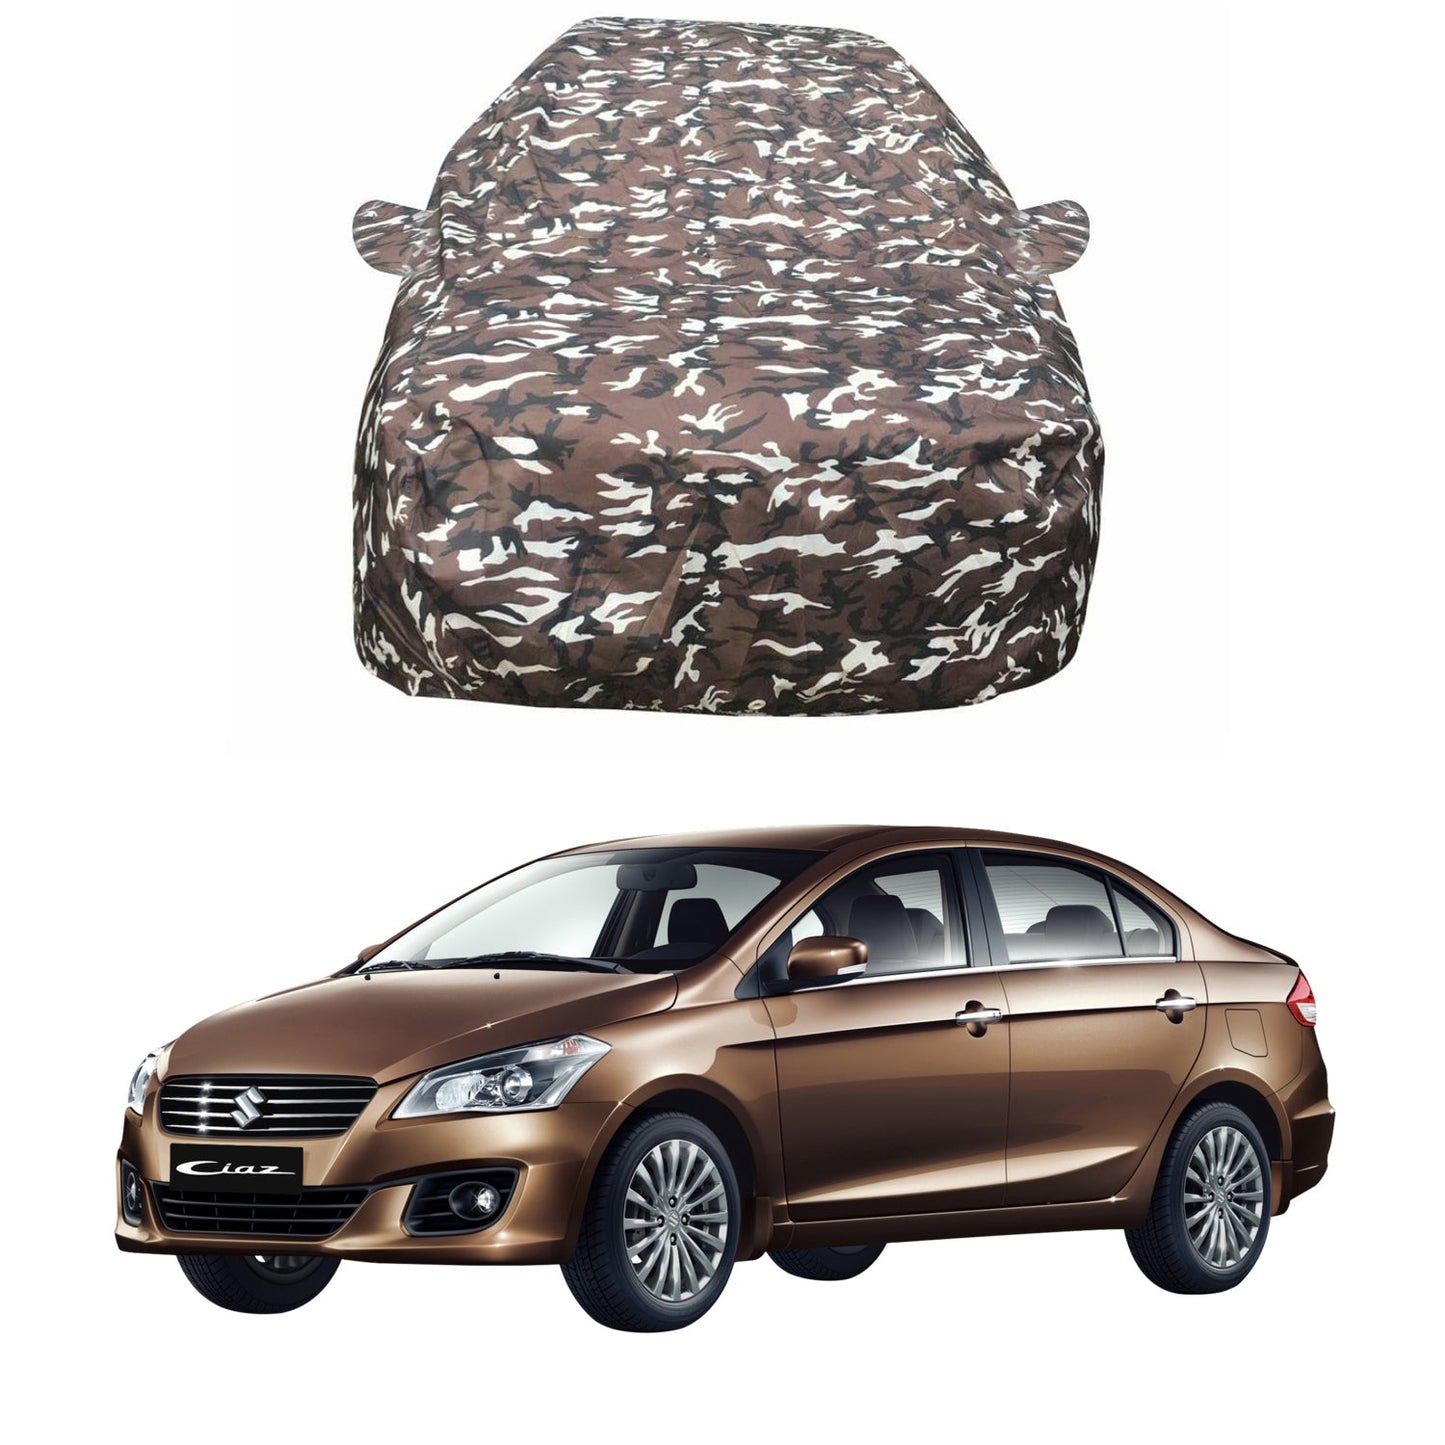 Oshotto Ranger Design Made of 100% Waterproof Fabric Car Body Cover with Mirror Pockets For Maruti Suzuki Ciaz